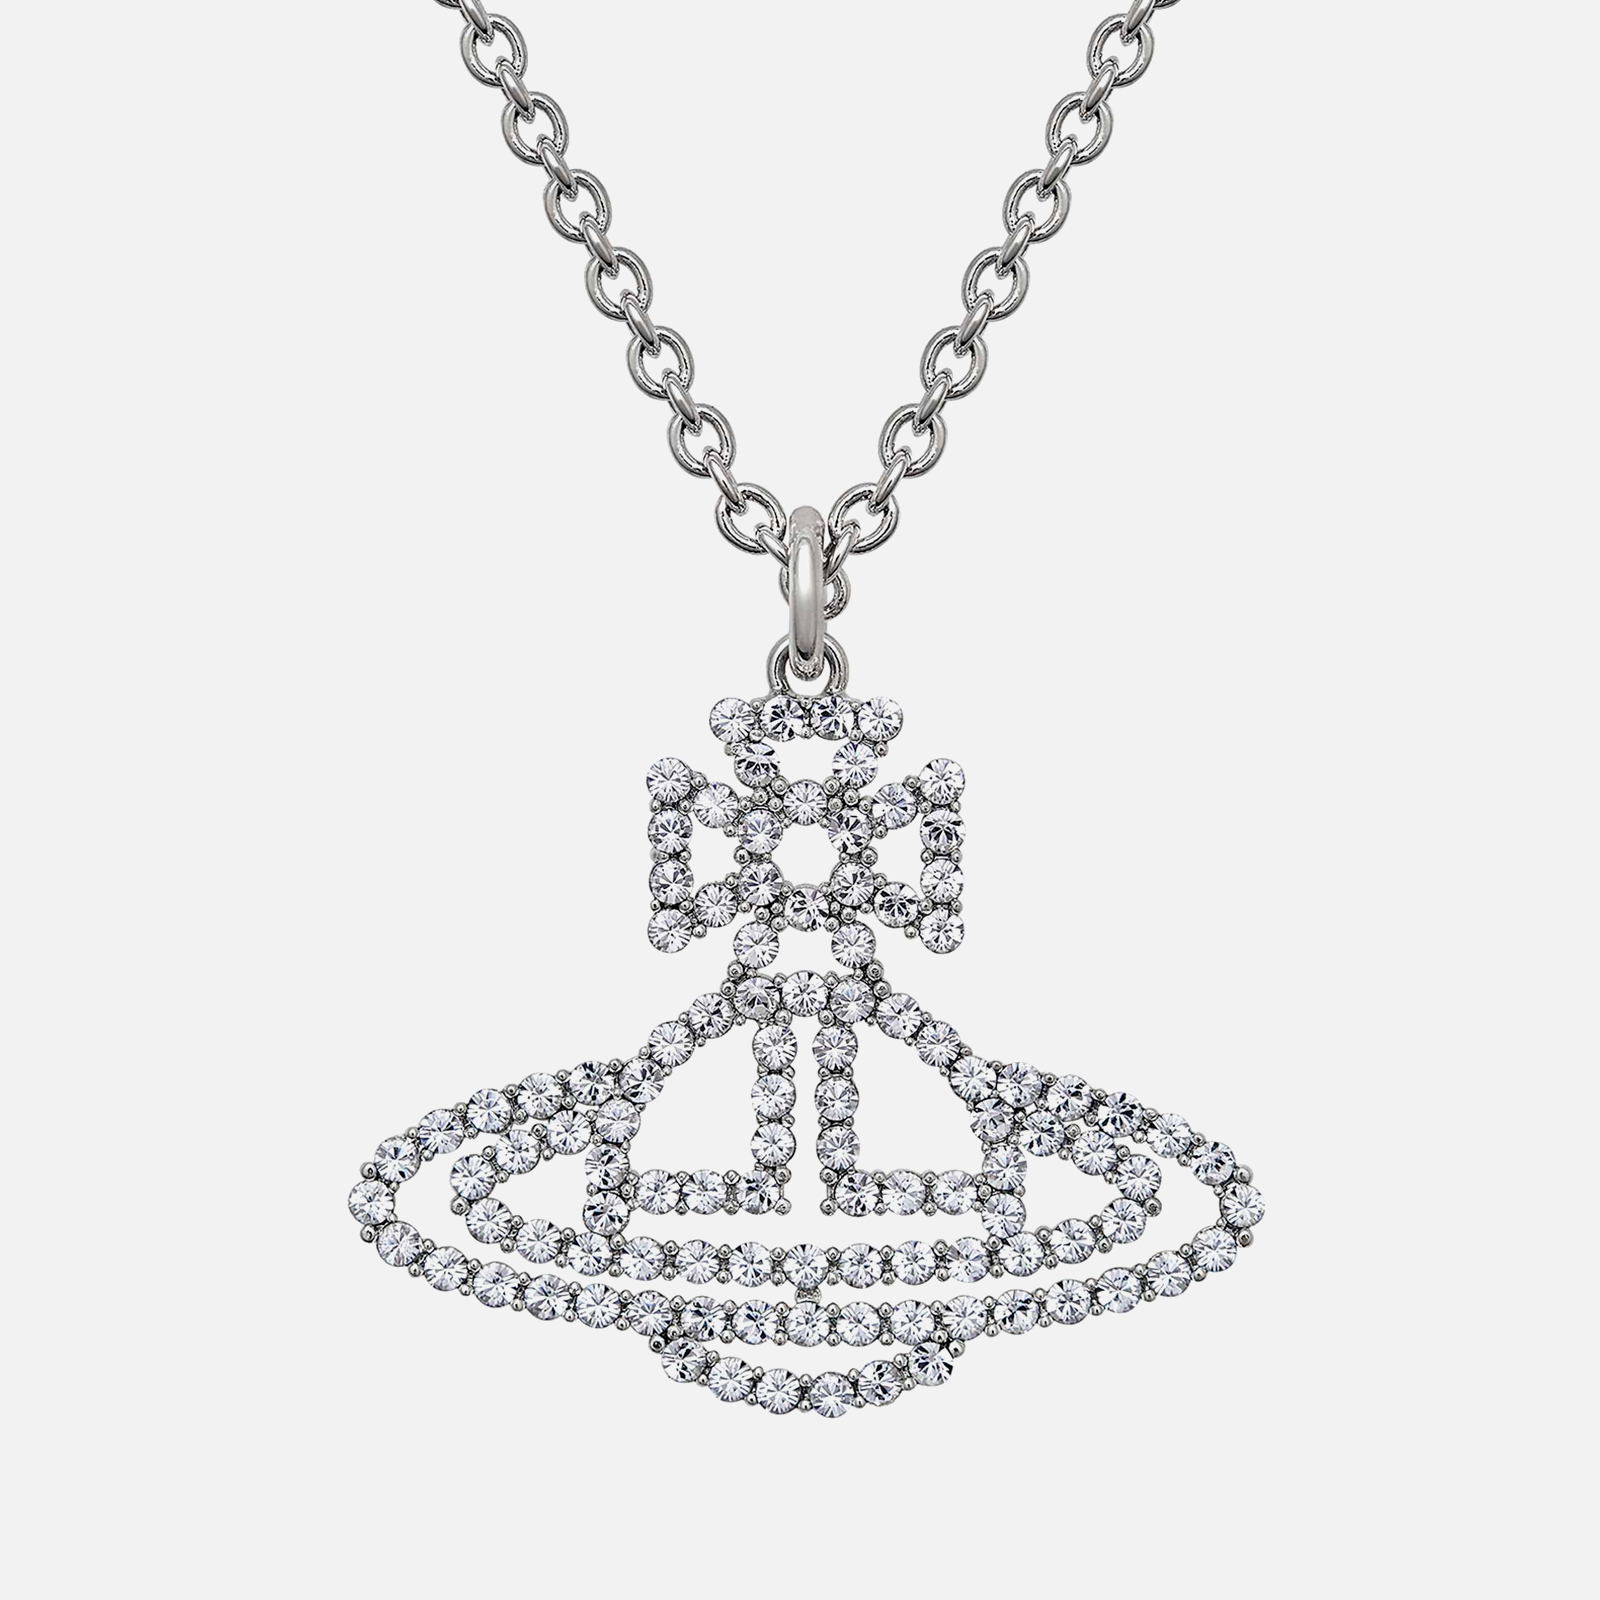 Vivienne Westwood Annalisa Silver-Tone and Crystal Necklace | Coggles